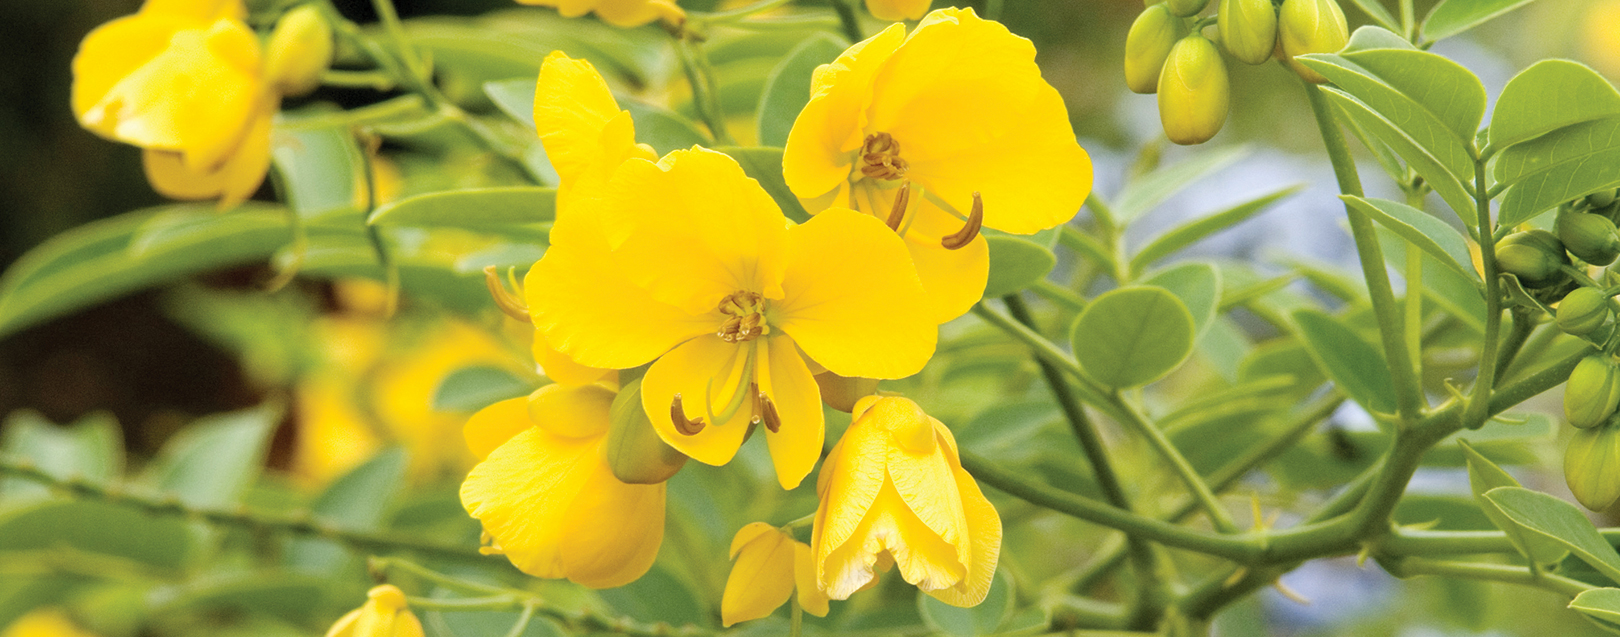 Senna Leaves: Small herb;  Big, reliable idea March 2018 issue